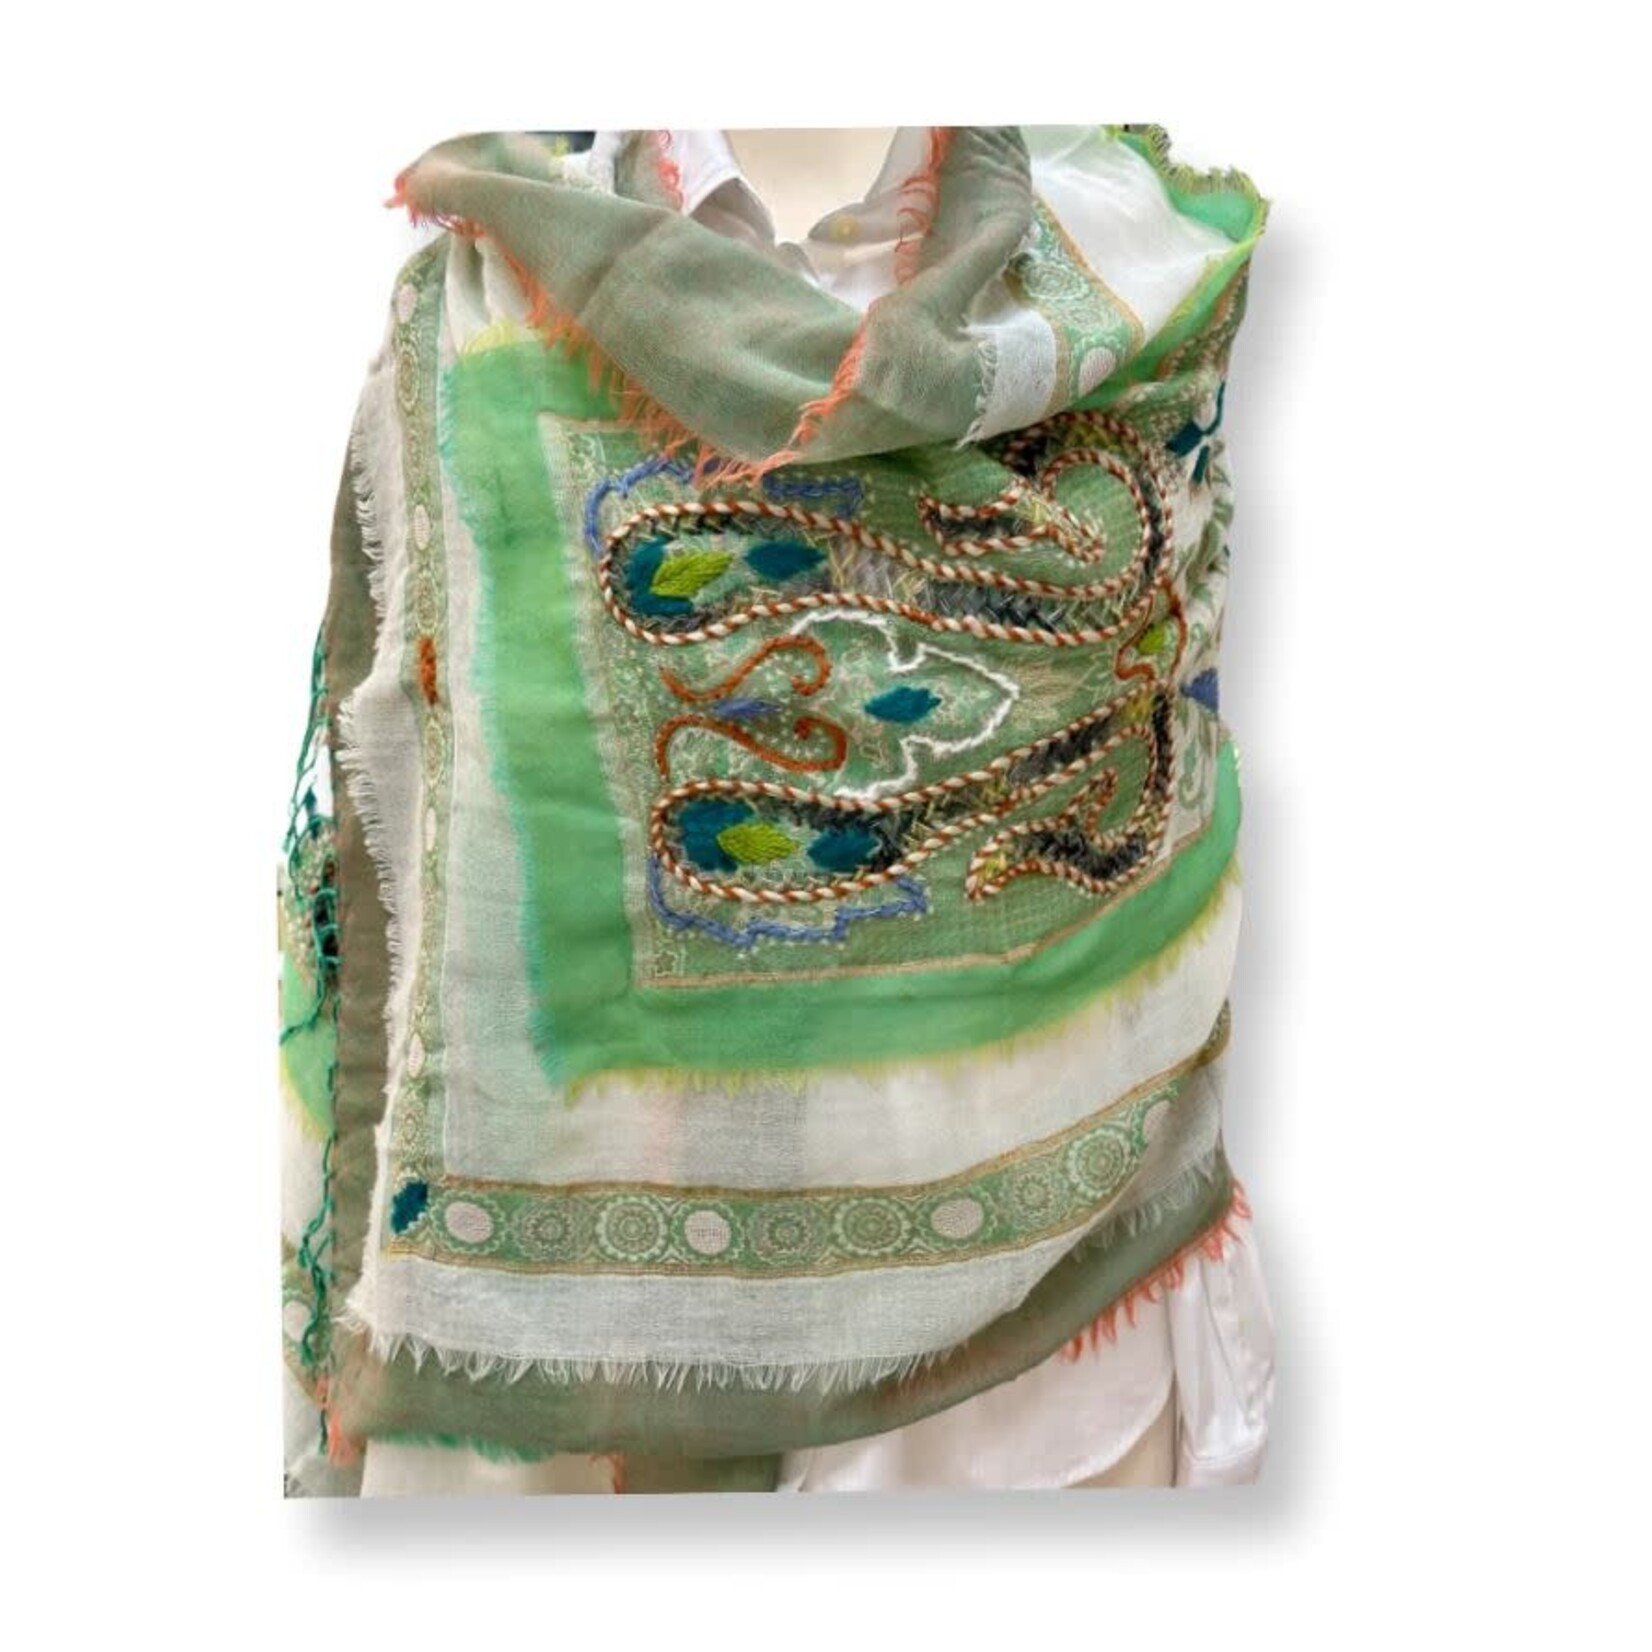 David Jeffery Wool Shawl Shades of Green &Ivory with Colorful